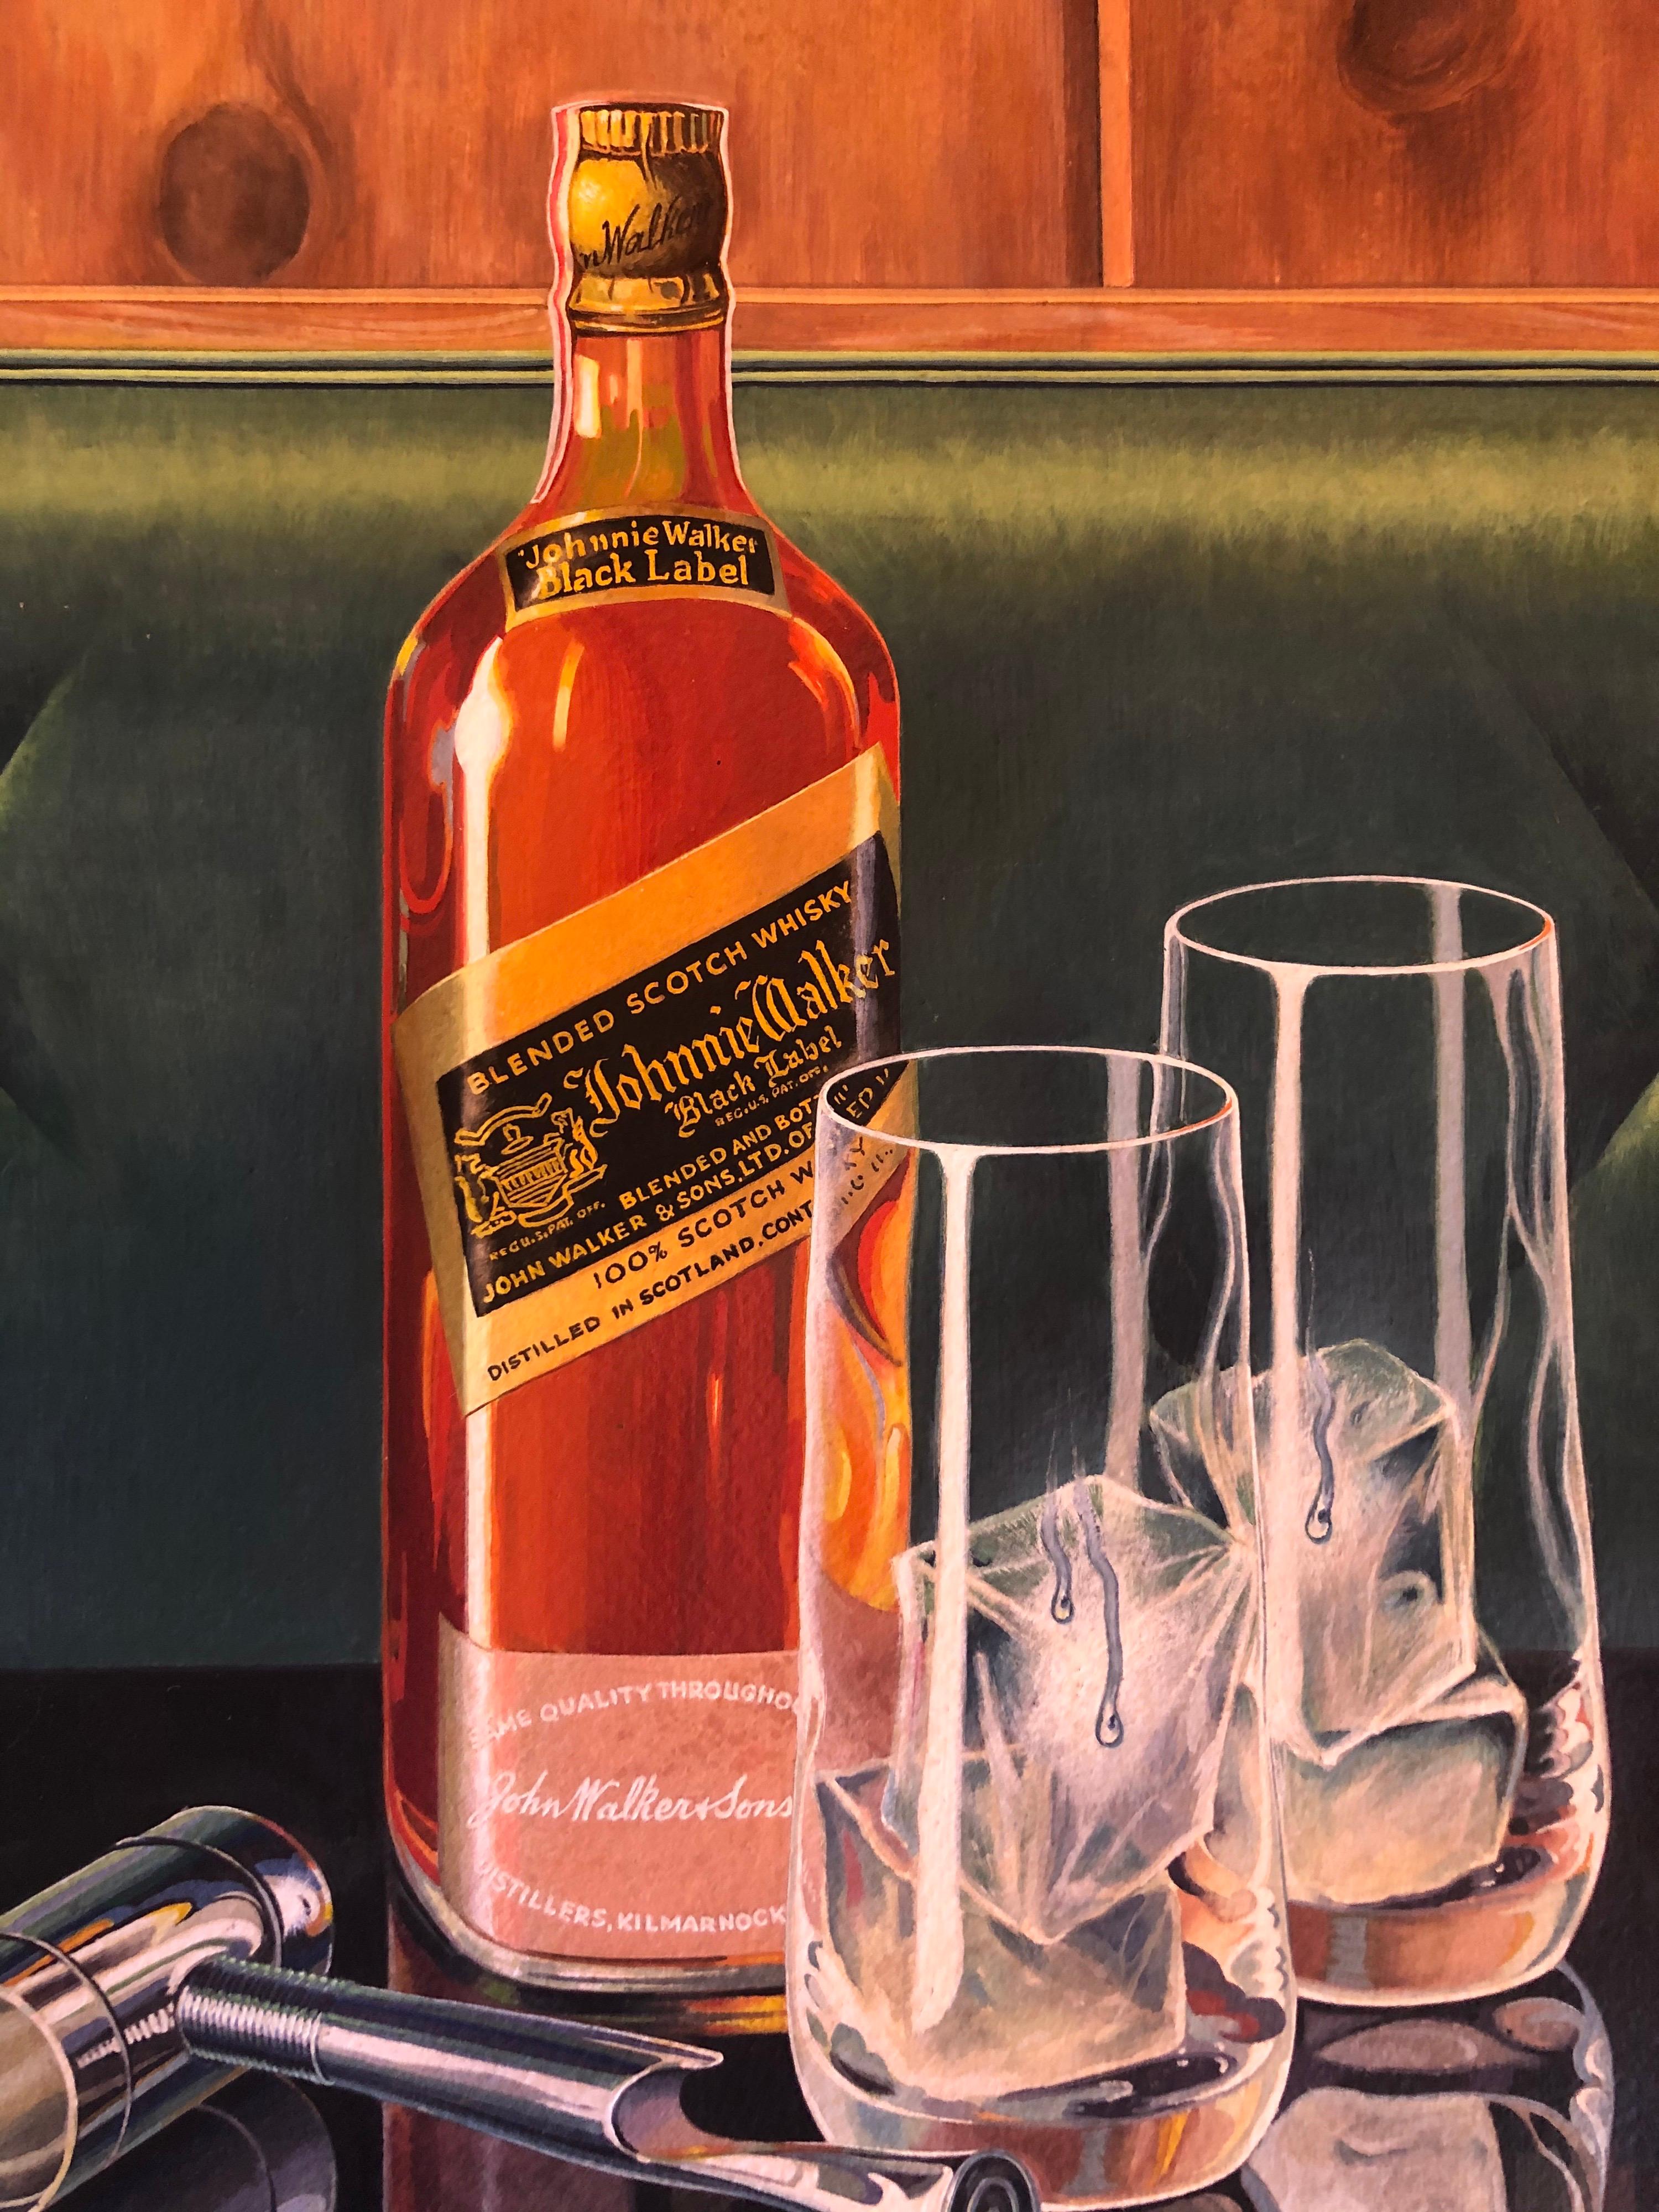 A very rare and collectible original oil on board painting by reknowned listed artist Arthur Fizpatrick, circa 1953. The piece depicts a bottle of Johnny Walker Black scotch and two tall glasses with ice cubes. is unframed and the painted image is